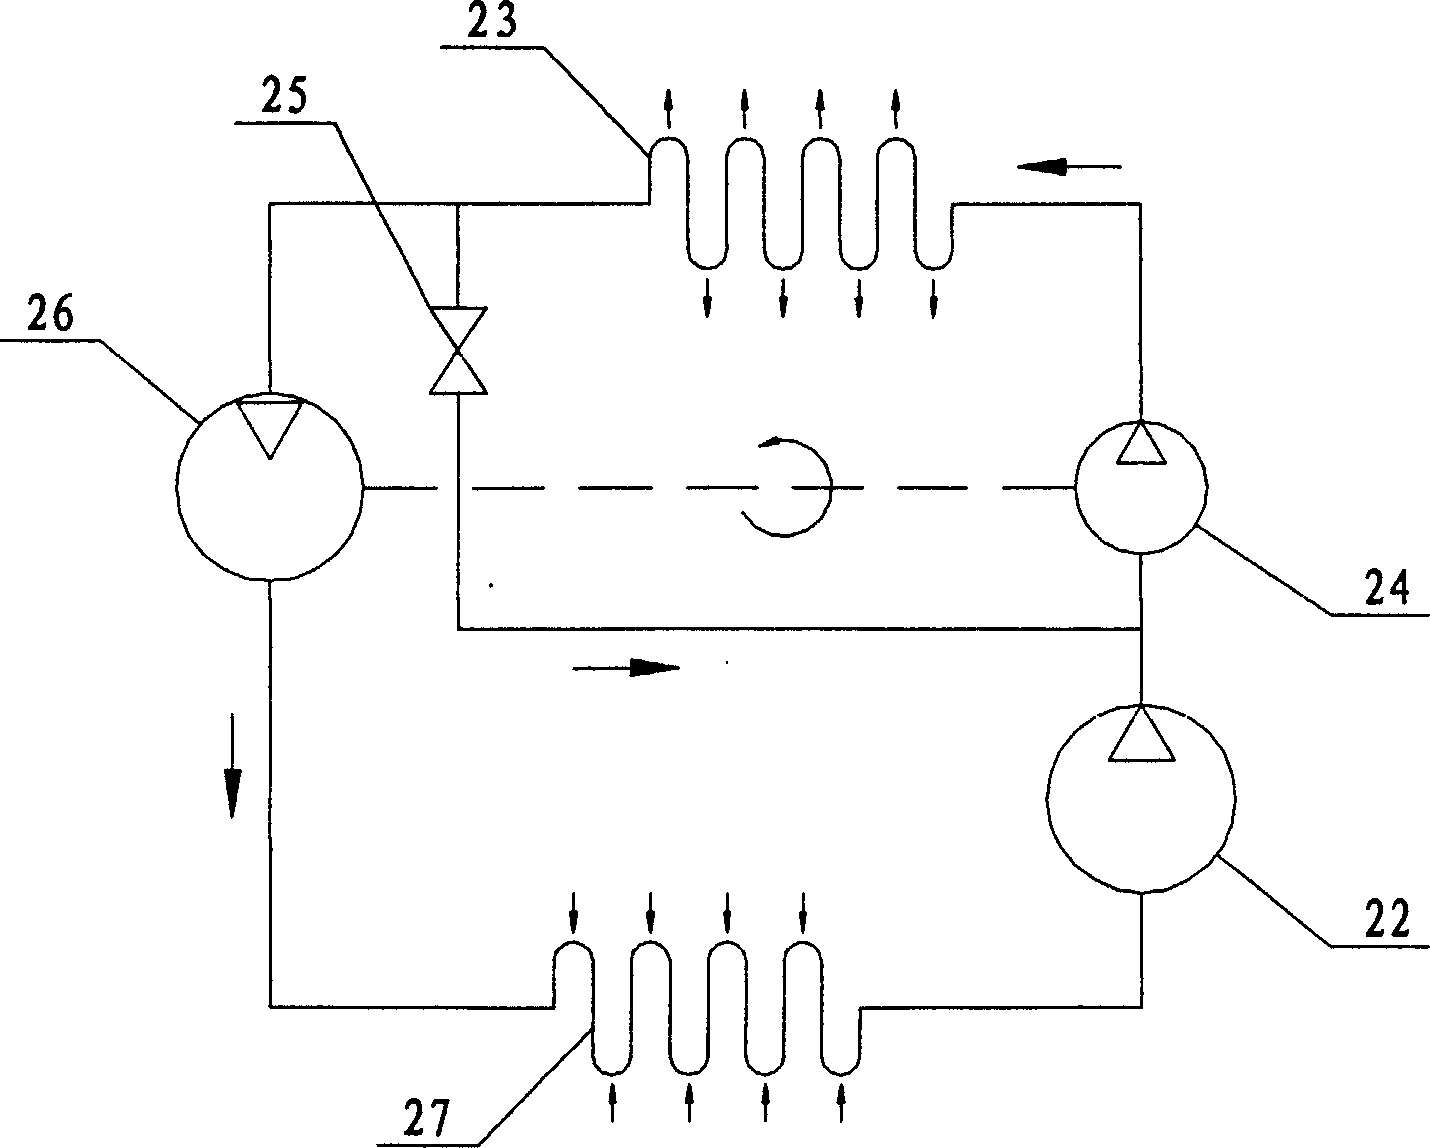 Steam compression type refrigeration cycle device of approximate ideal inverse Carnot cycle efficiency